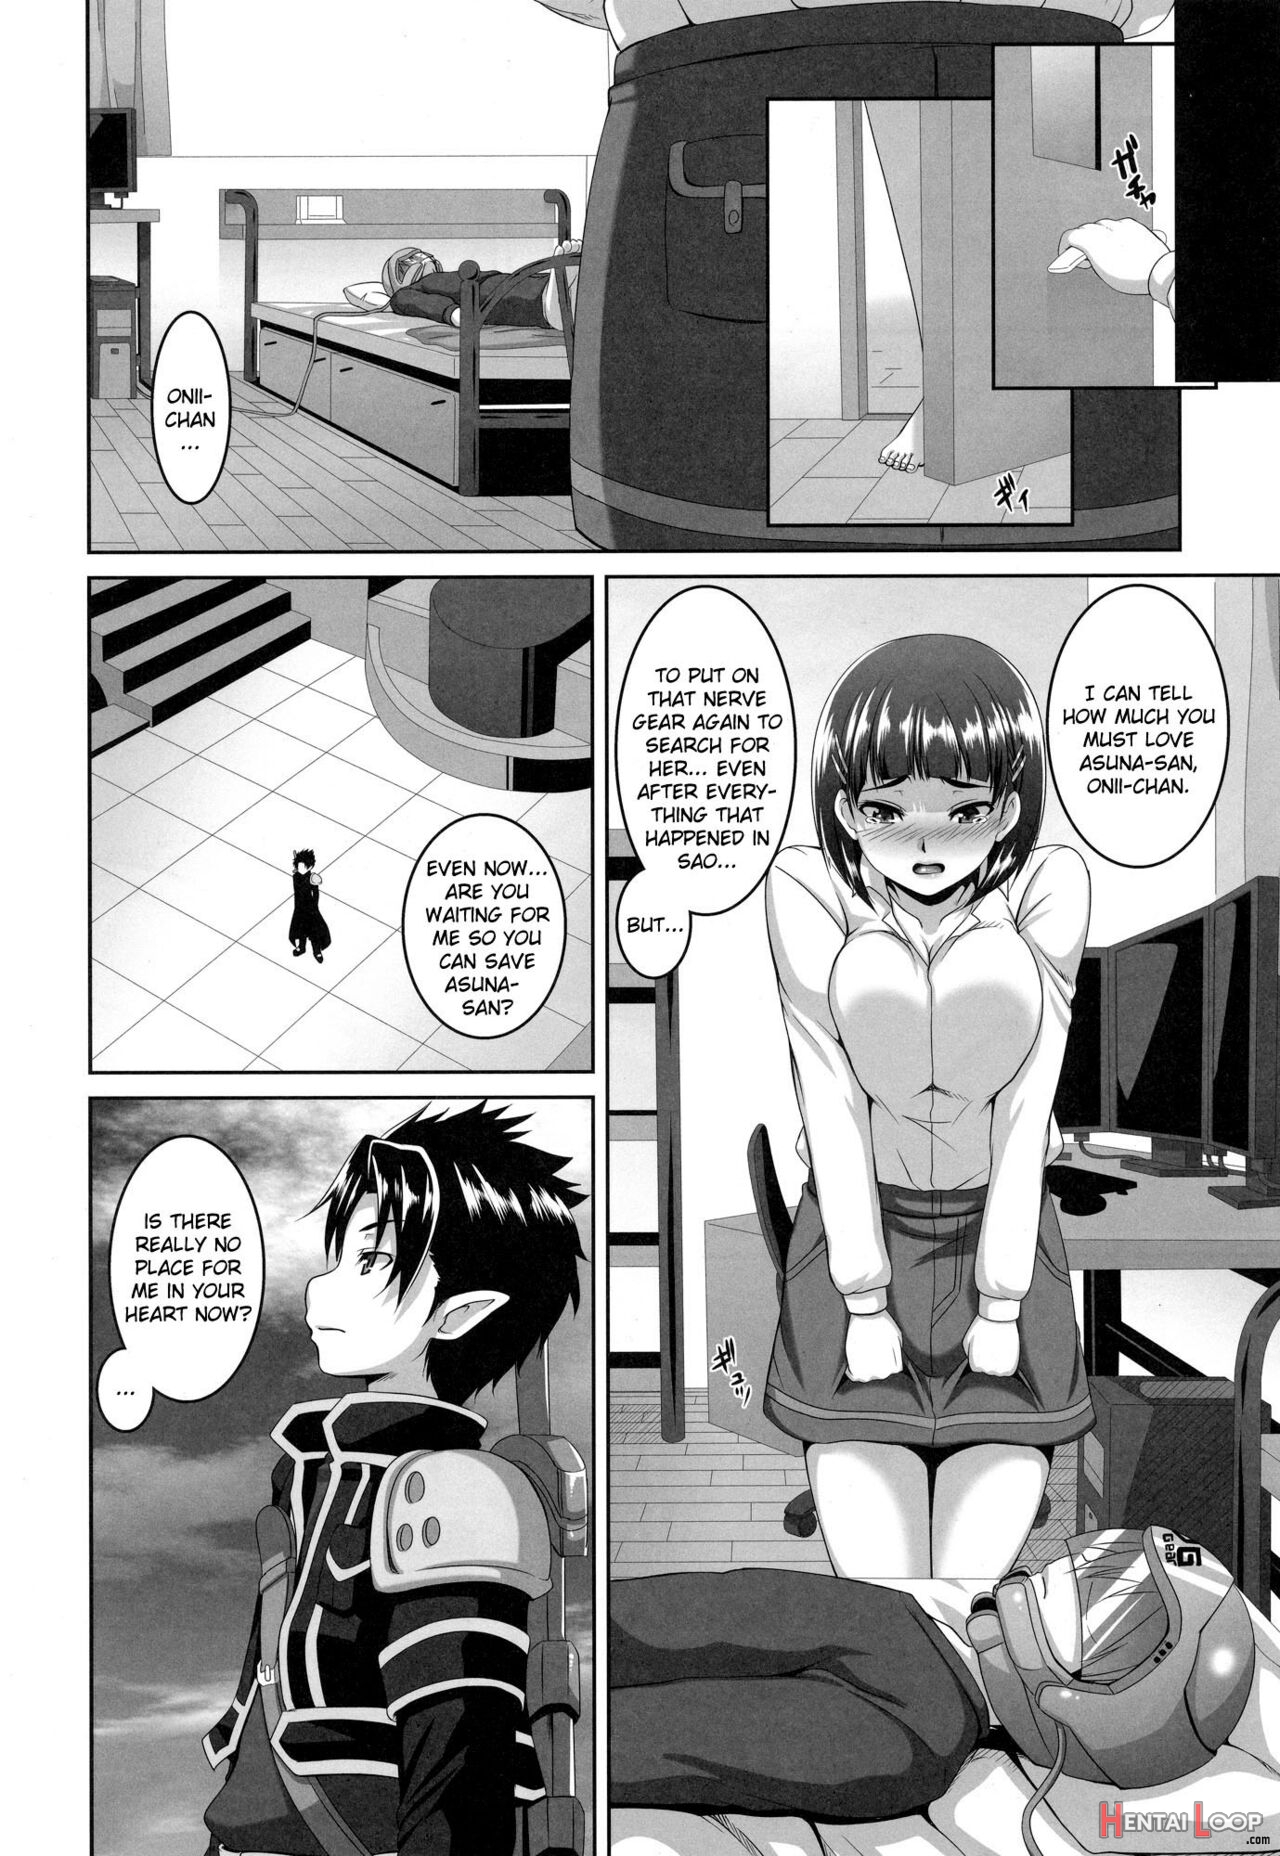 After All, I'm In Love With Onii-chan page 3